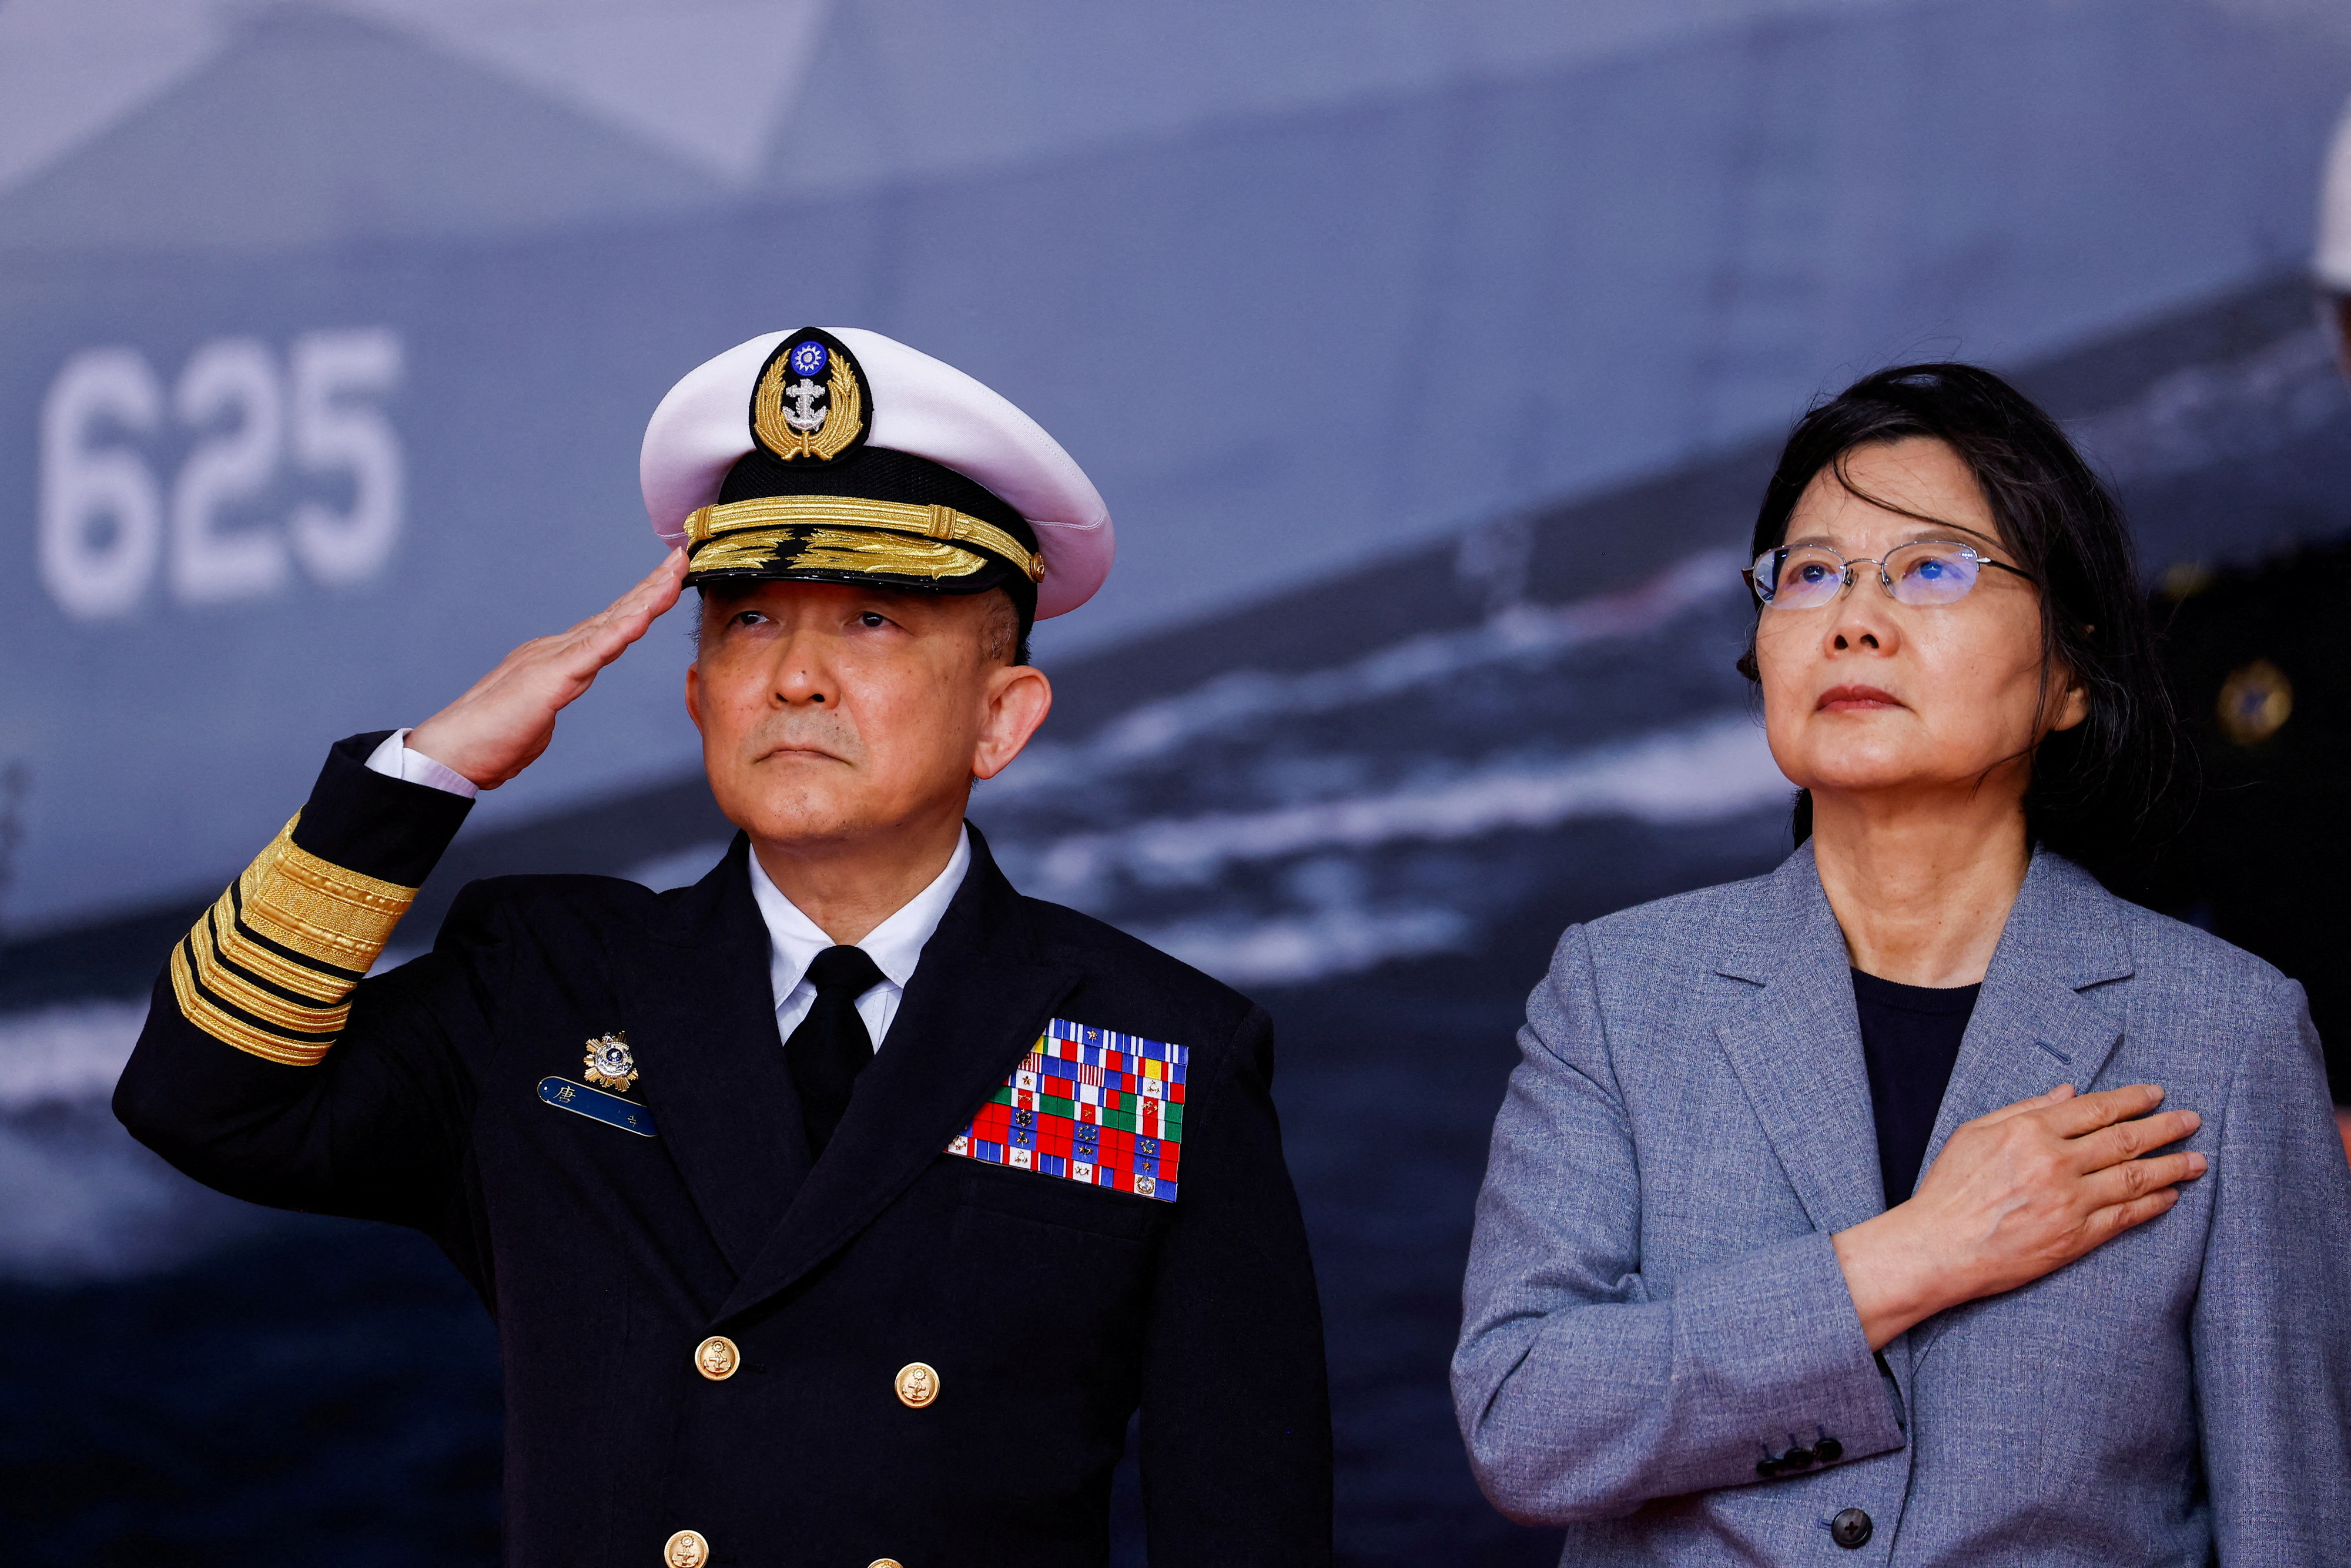 Taiwan President Tsai Ing-wen and Taiwan Navy Commander Tang Hua attend the delivery ceremony of six made-in-Taiwan Tuo Chiang-class corvettes at a port in Yilan